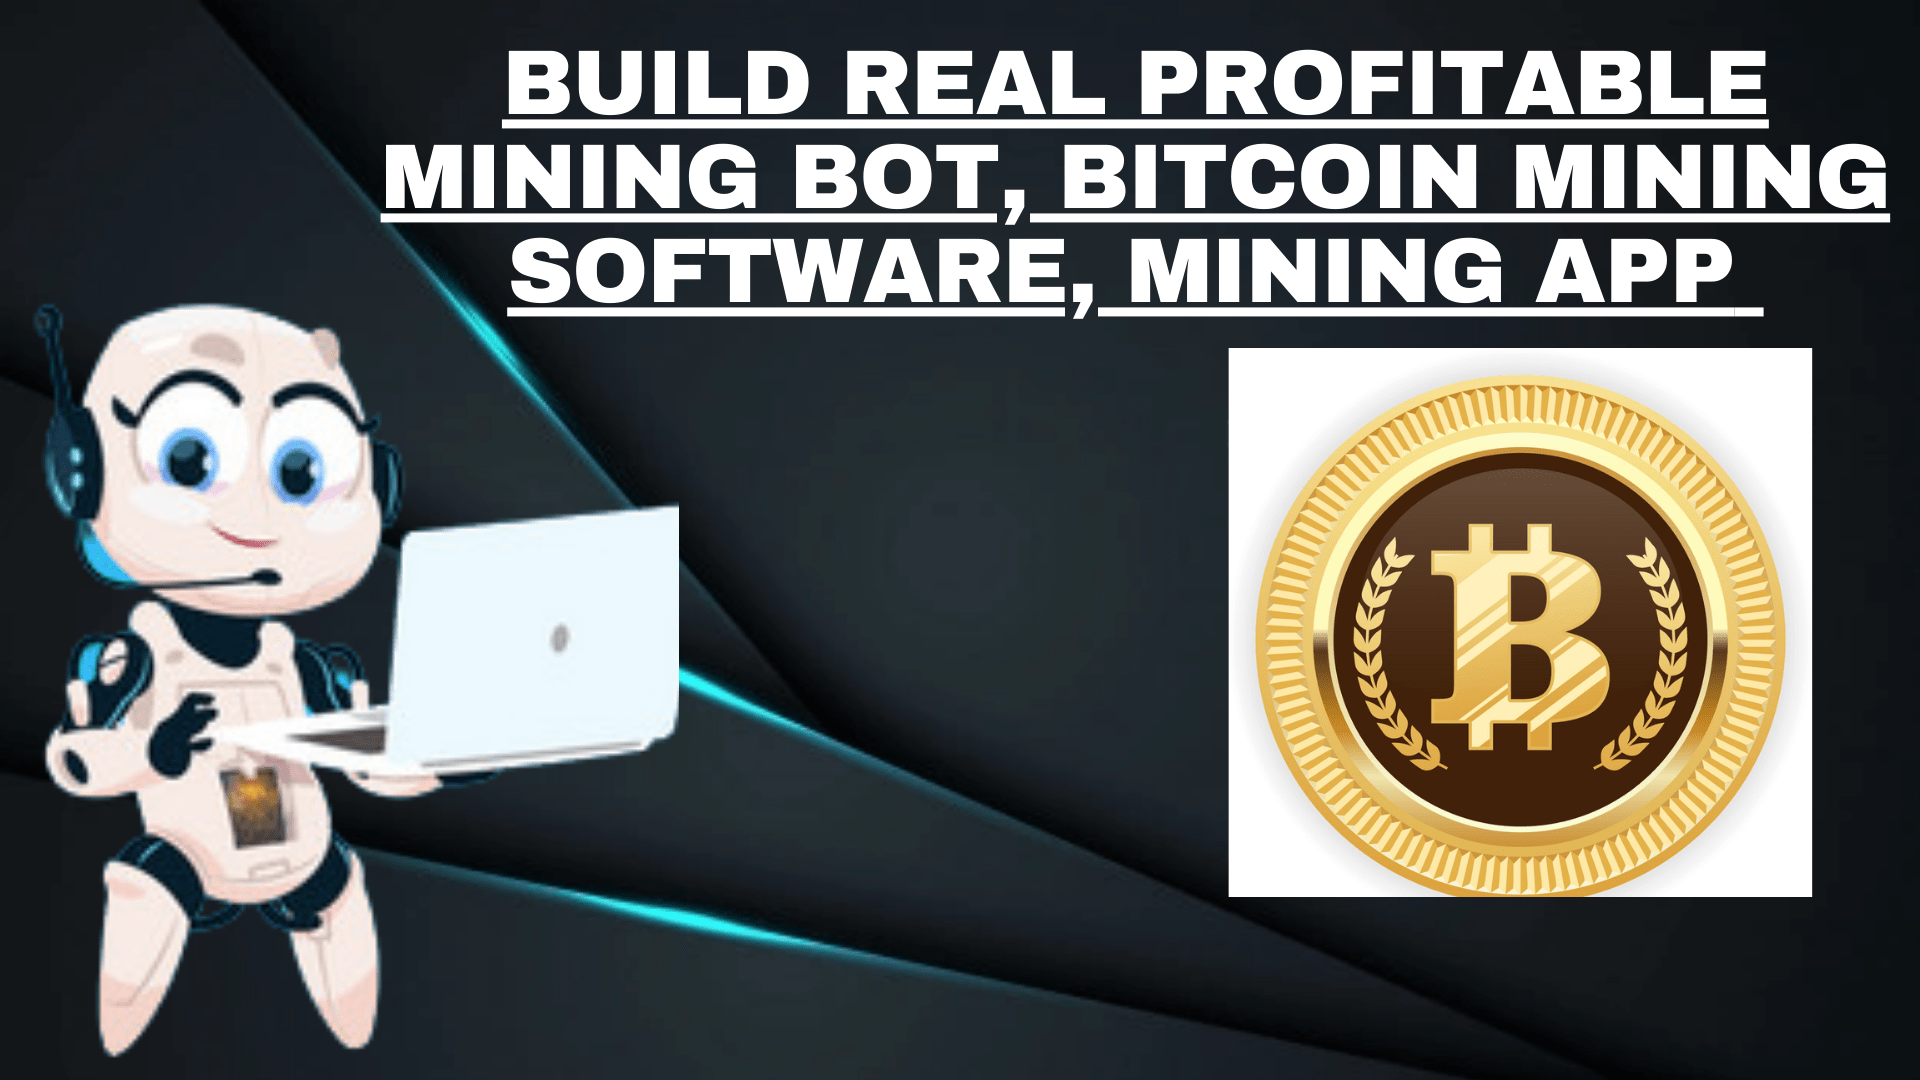 I will build bitcoin mining bot, mining software app and cryptocurrency, FiverrBox